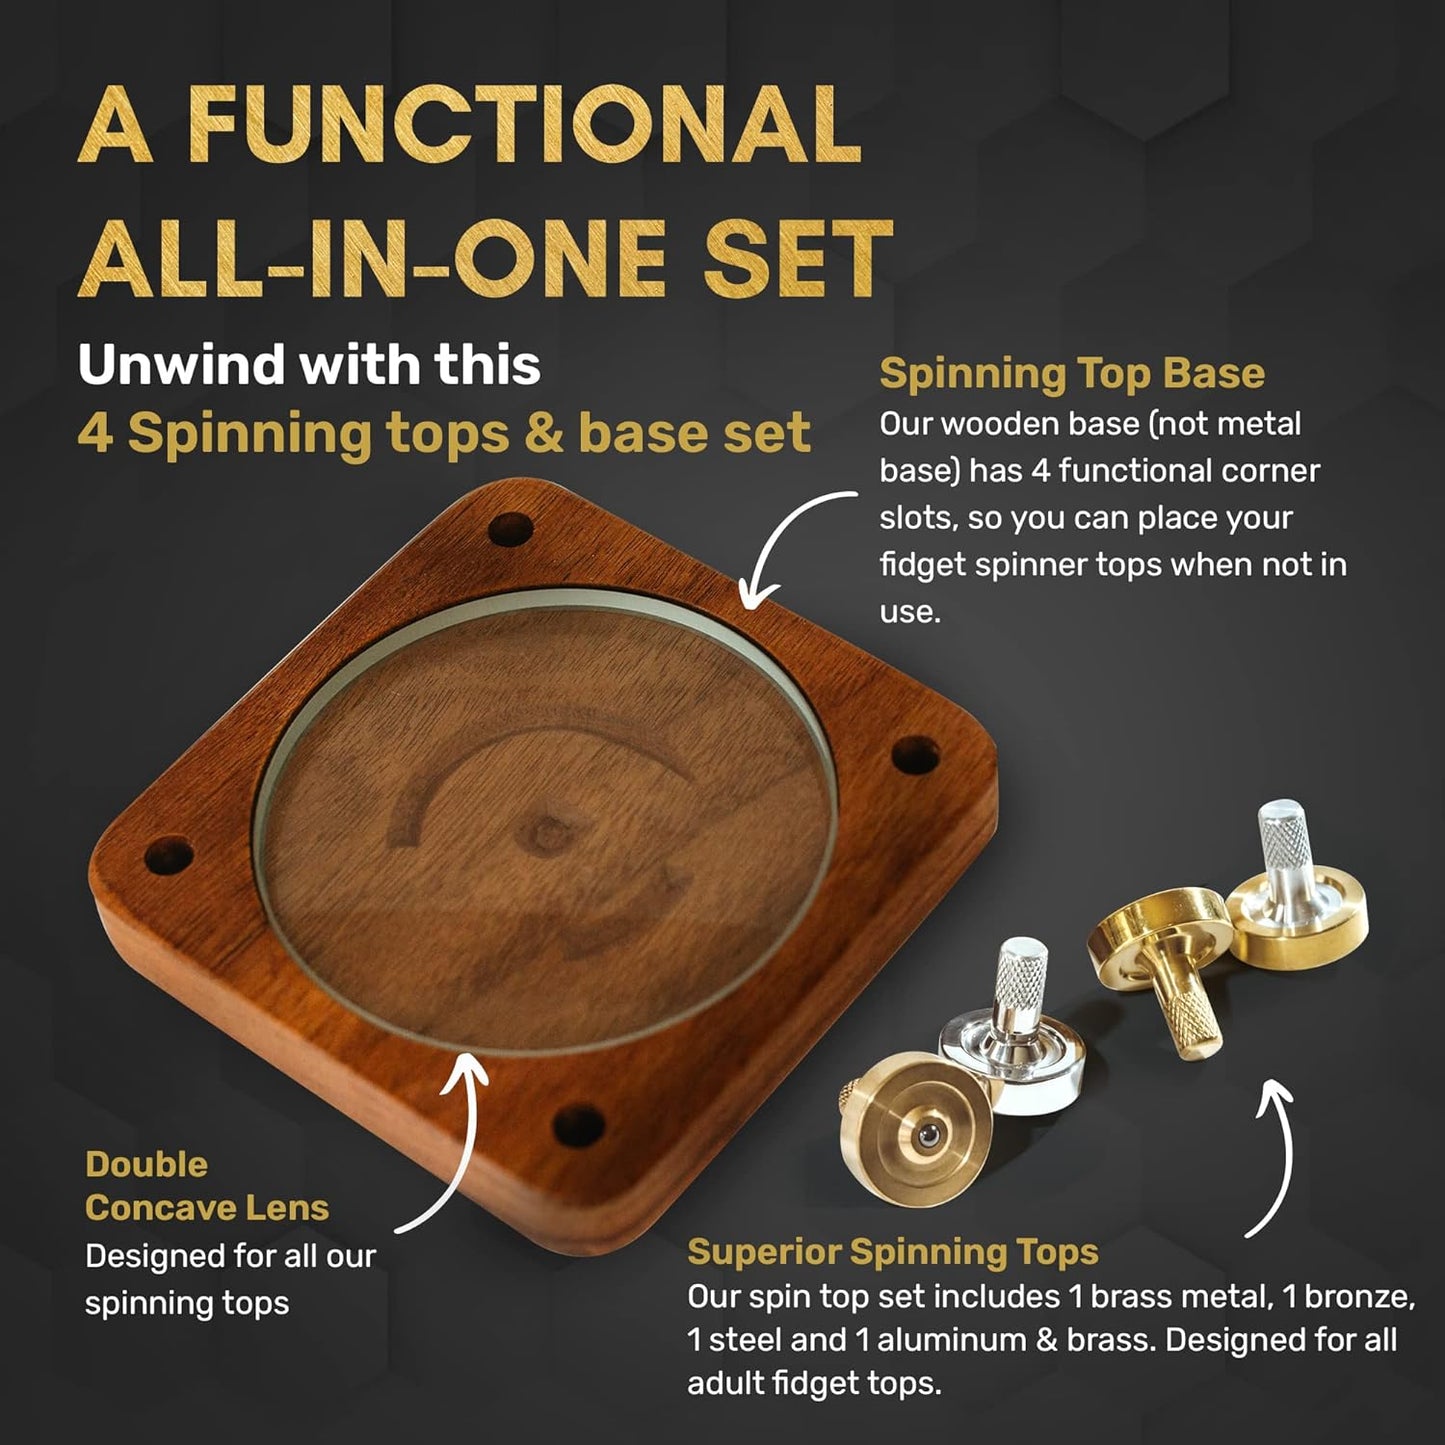 Schulte Metal Spinning Top & Spinning Top Base Set, Toys for Mental Focus, Metal Fidget Toy Set, 4 Spinning Tops with Glass Top Black Walnut Base - Bruce Charles Designs